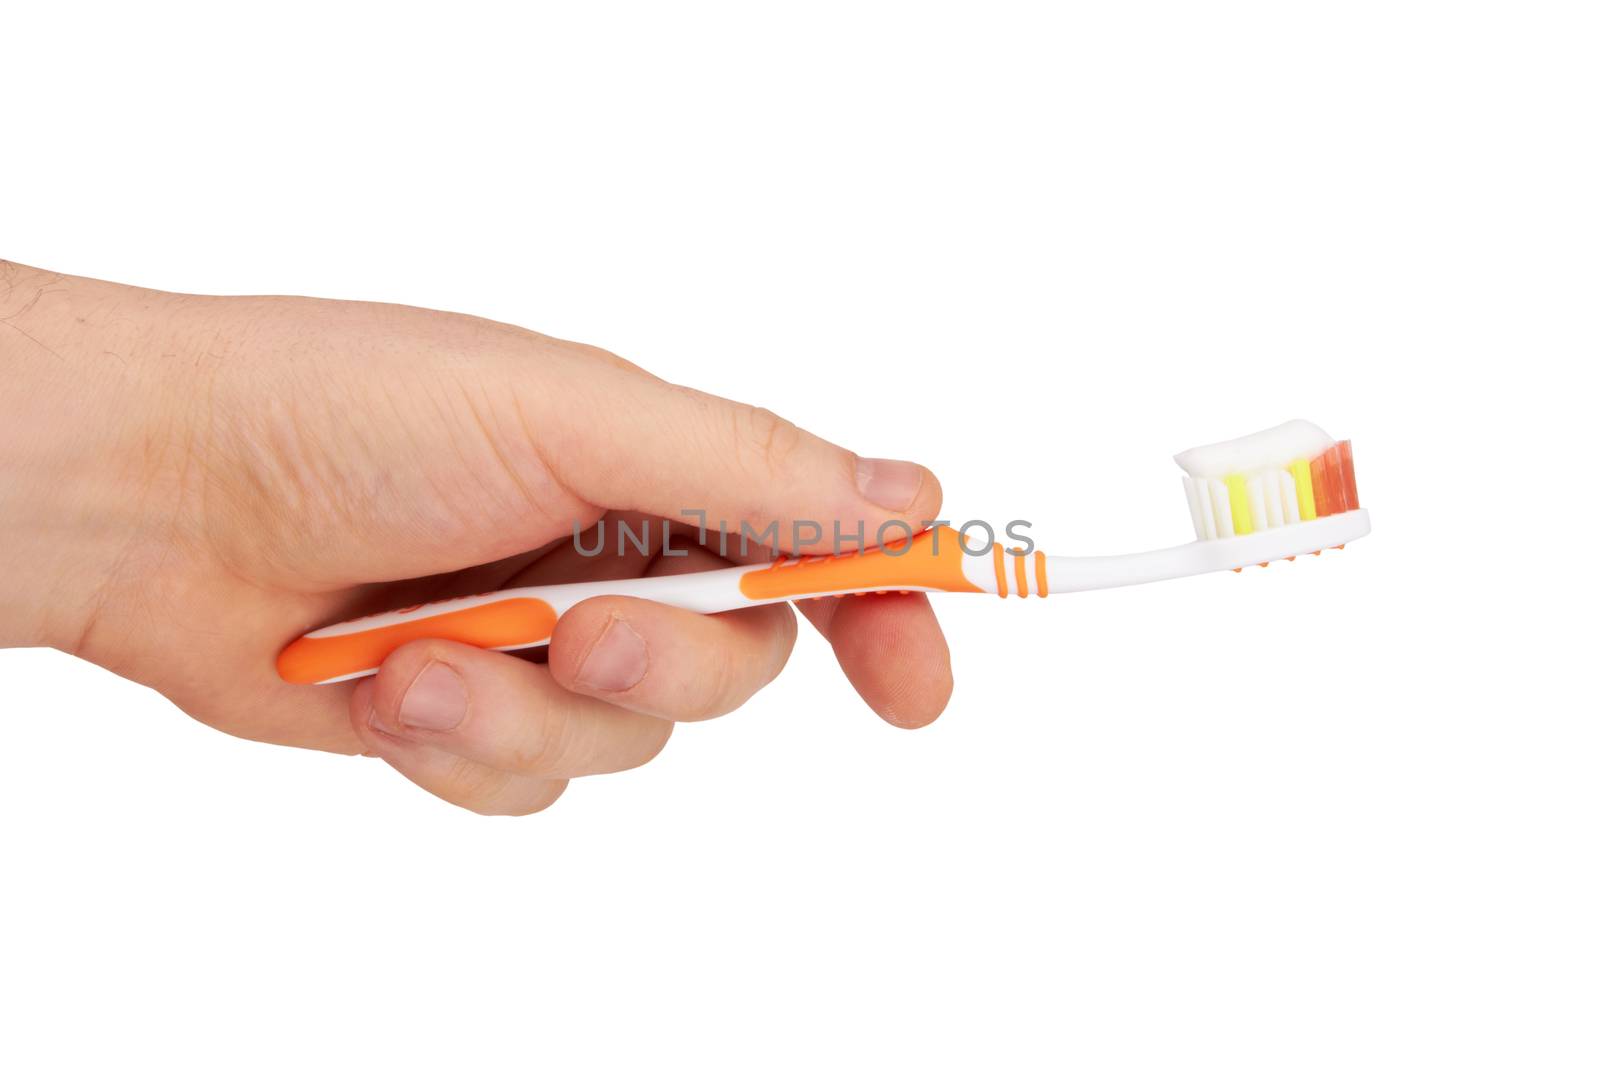  hand holding toothbrush isolated on a white